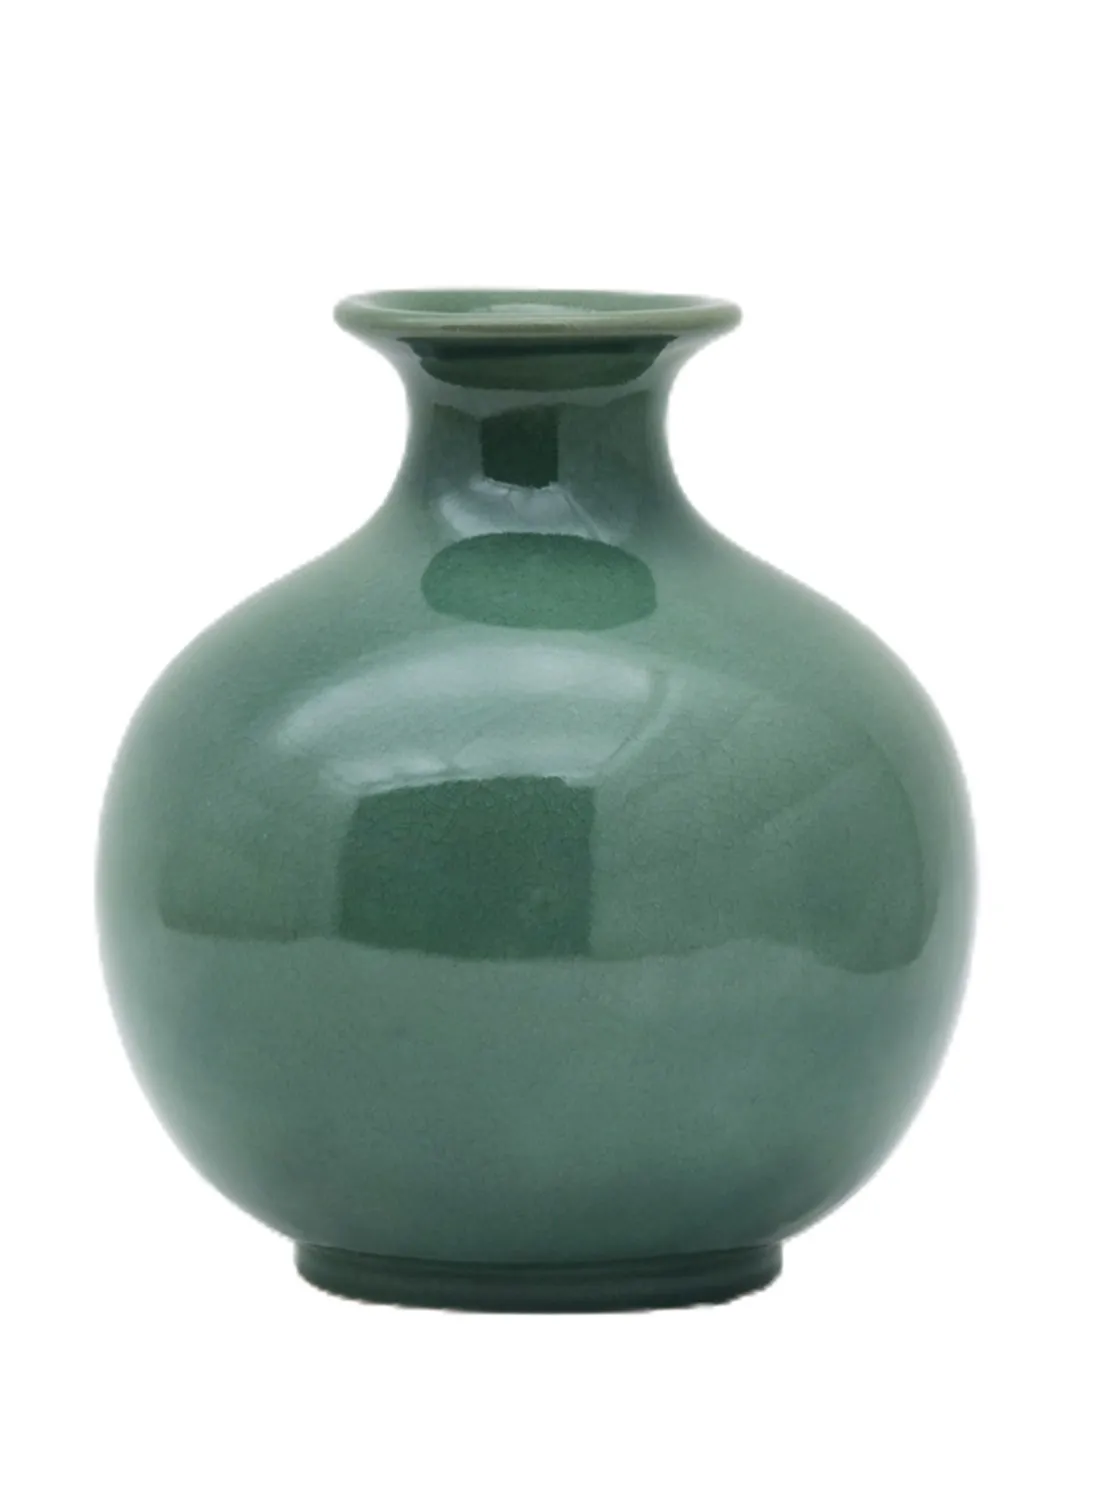 ebb & flow Classic Artistic Shape Ceramic Vase Unique Luxury Quality Material For The Perfect Stylish Home N13-070 Teal Green 25.5 x 29cm